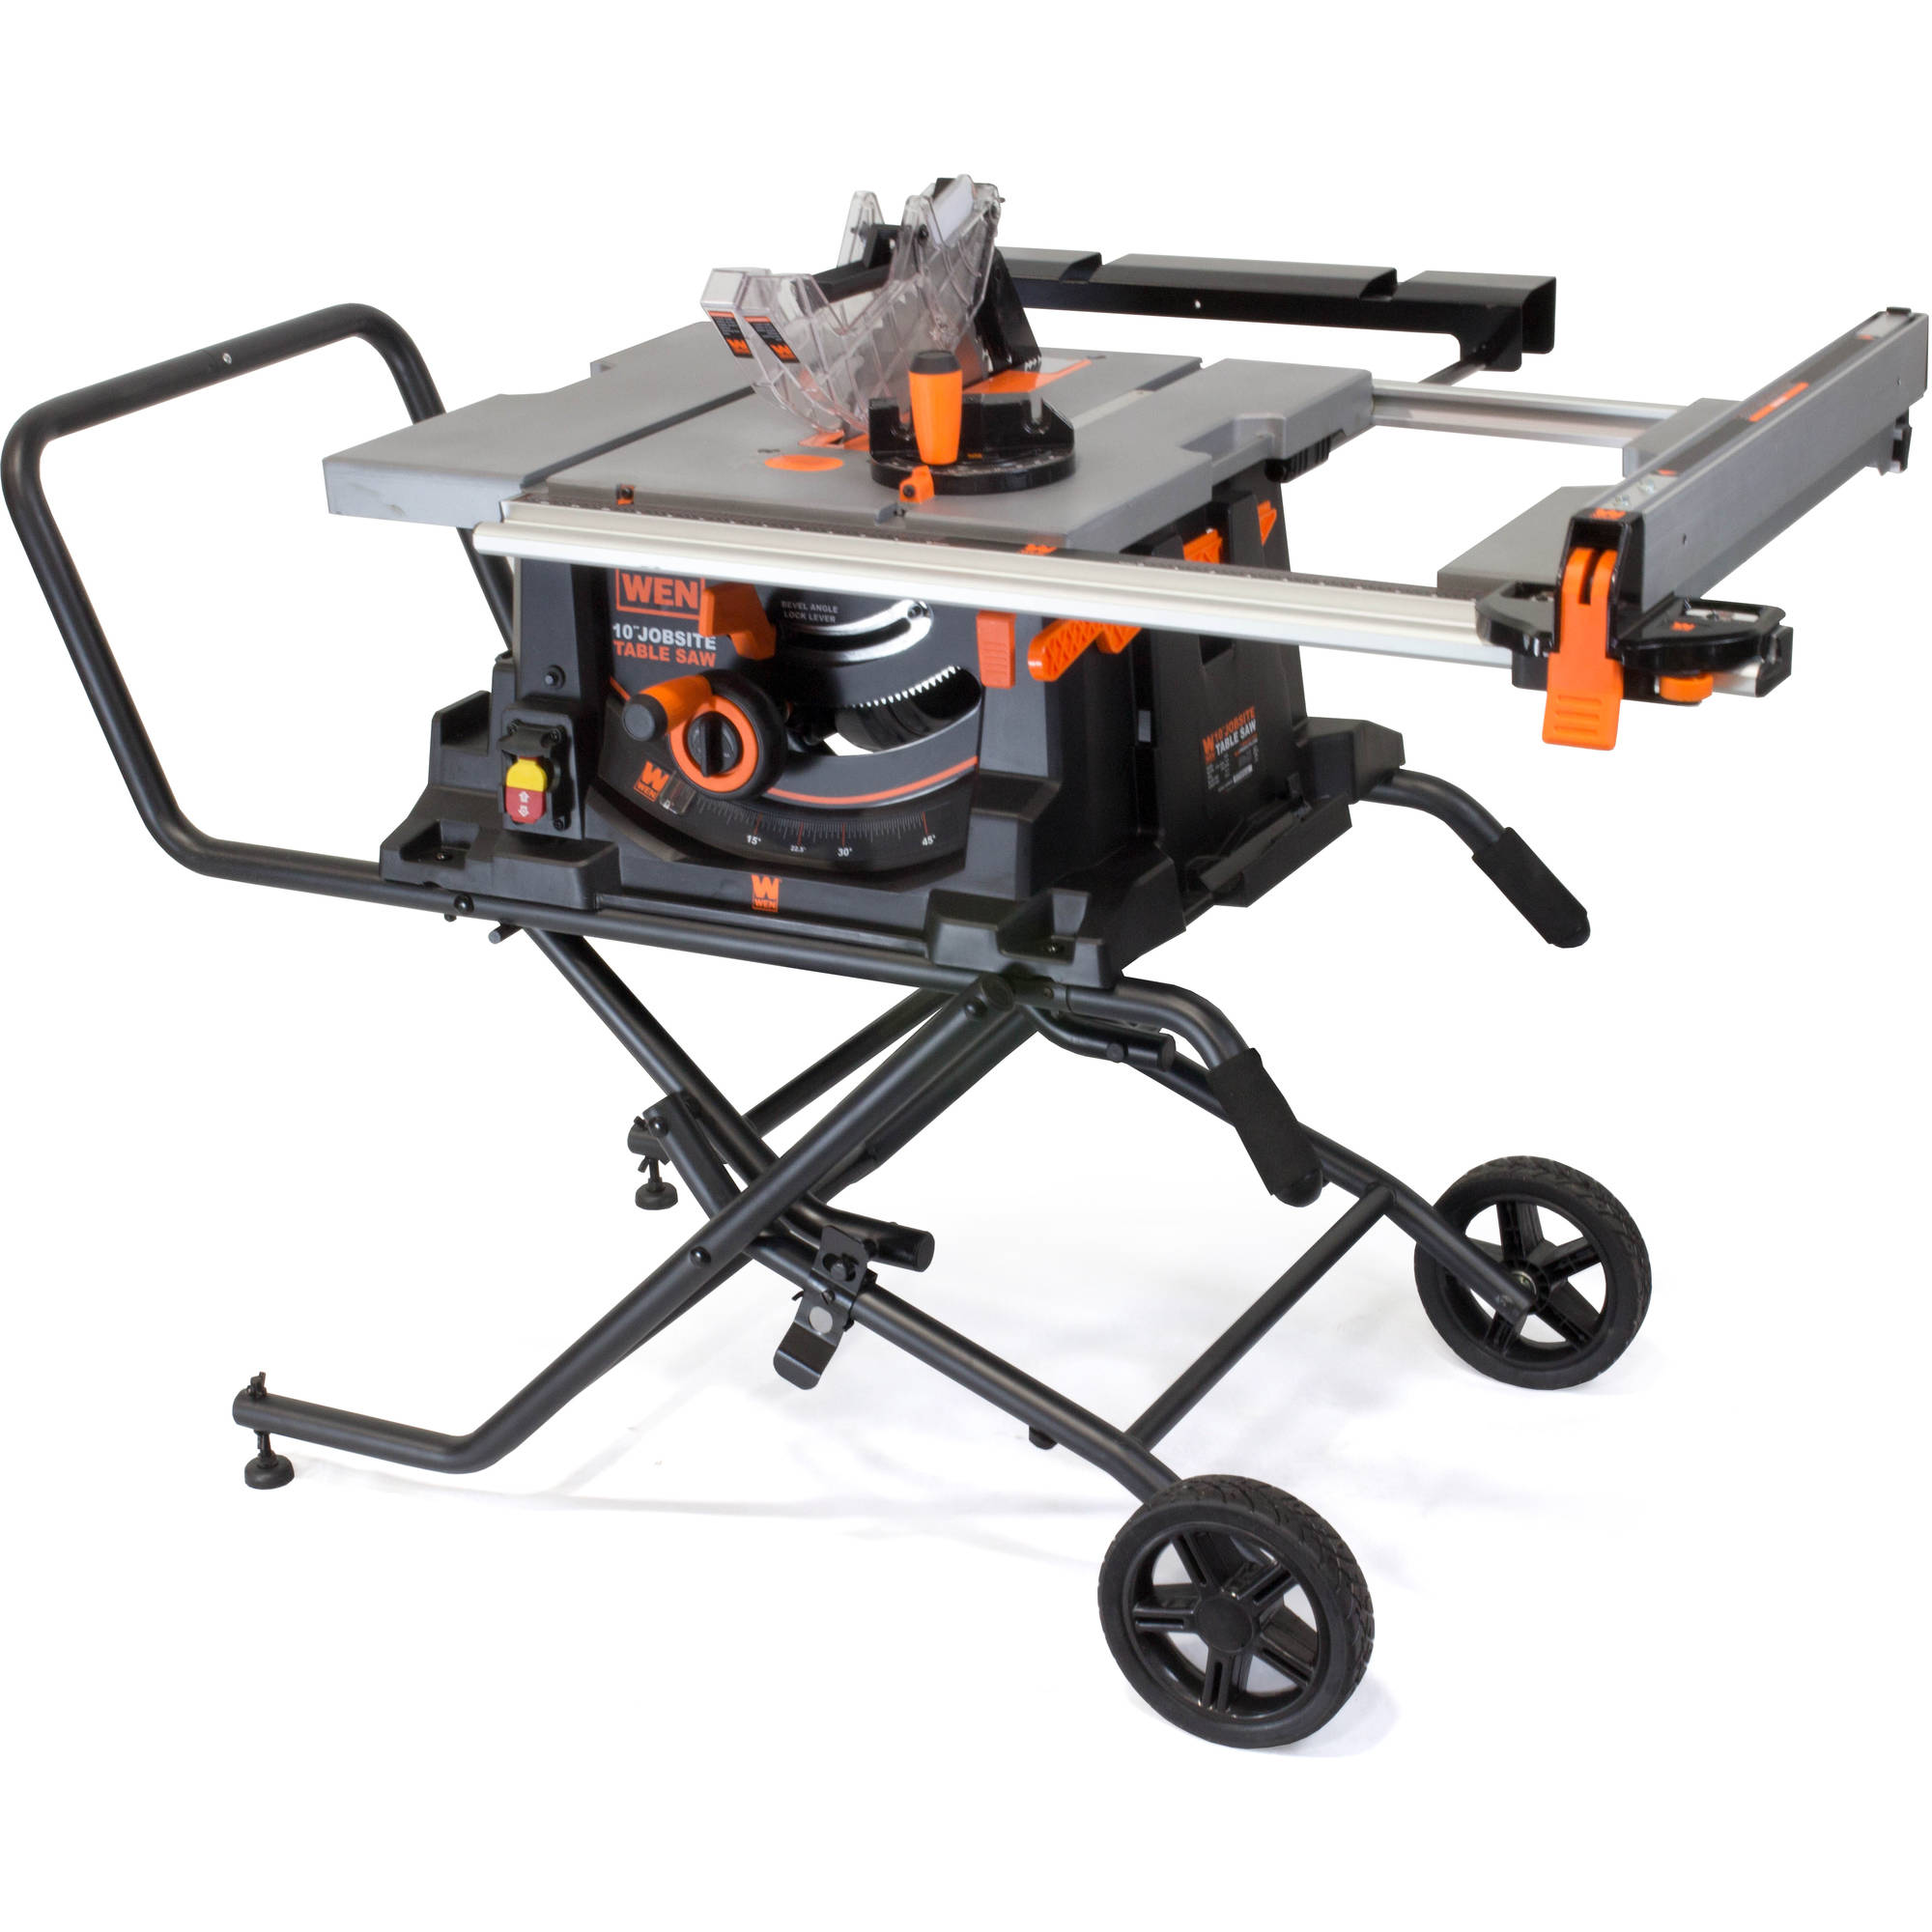 WEN 10-Inch Jobsite Table Saw With Rolling Stand, 3720 - image 1 of 4